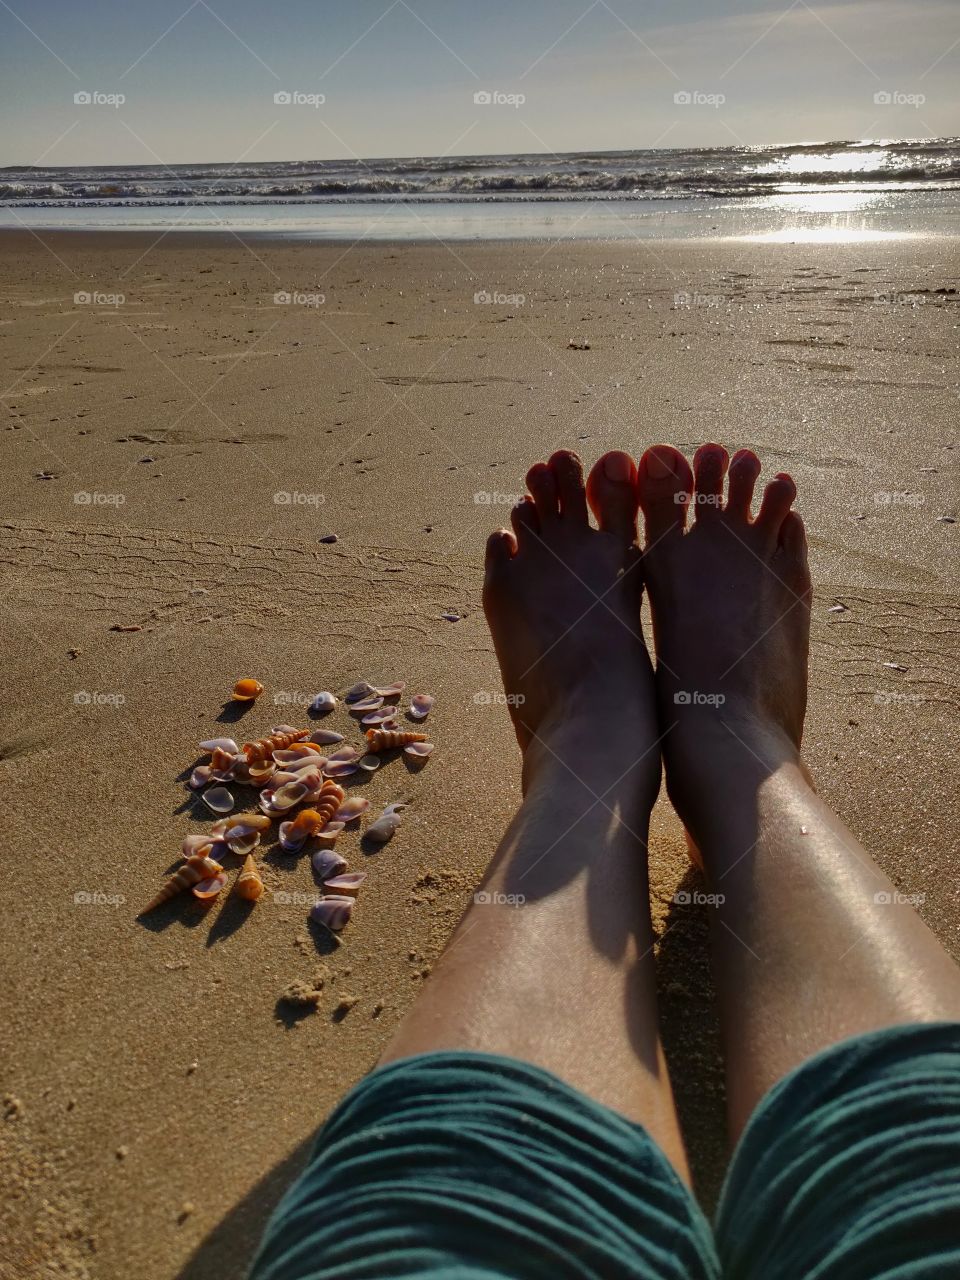 waiting to see the sunset with the shells I collected to take home